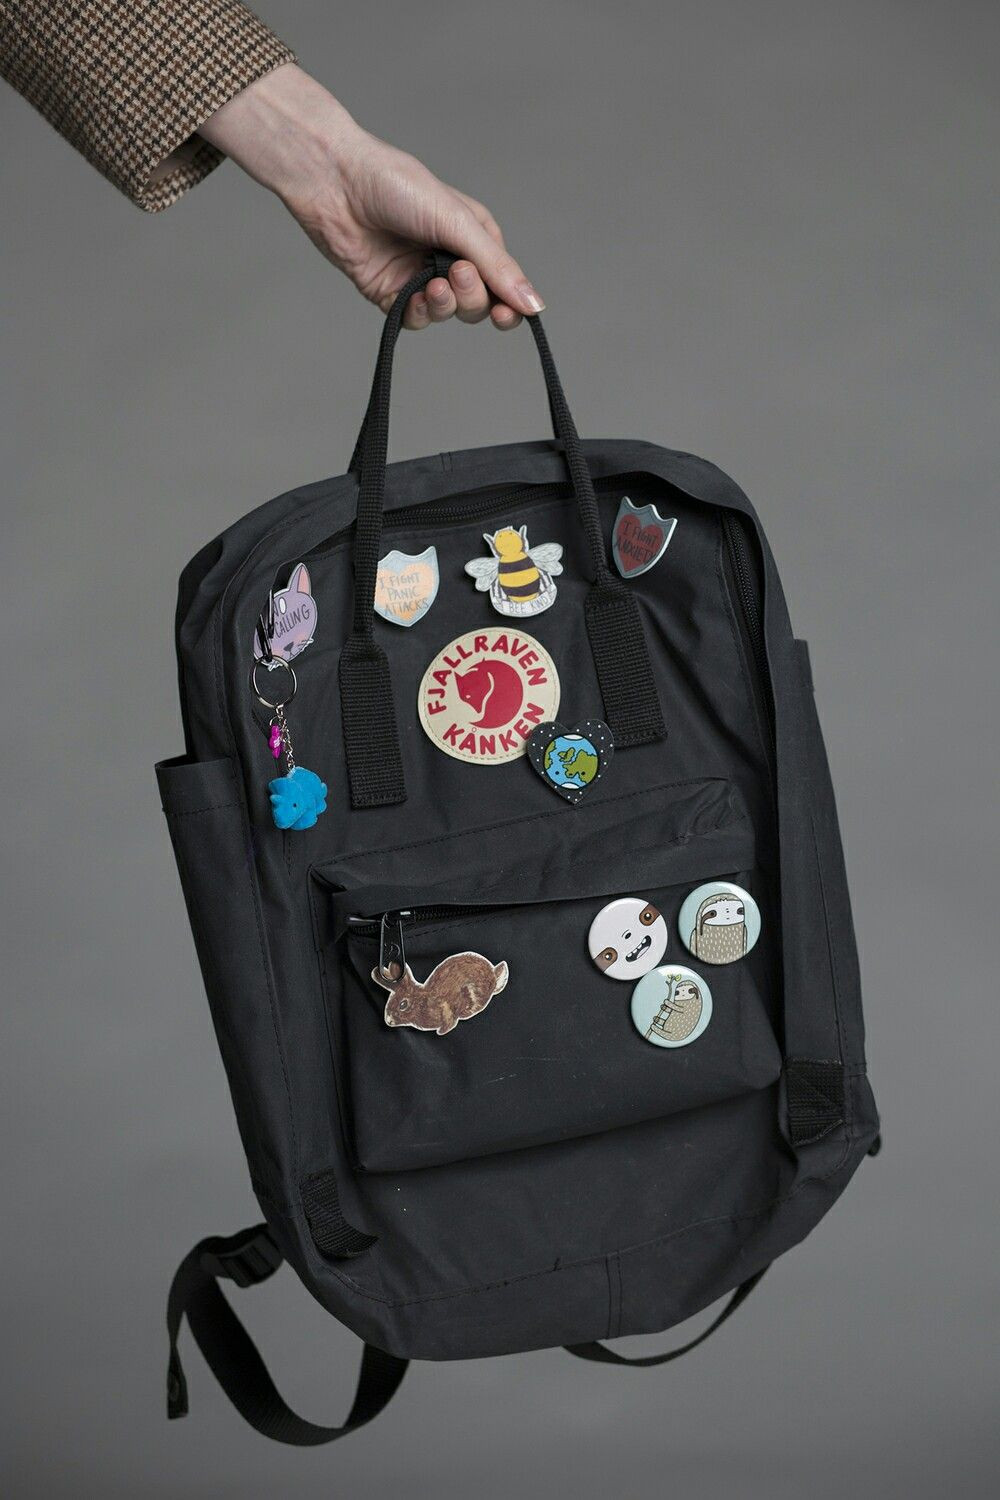 Pins On Backpack
 Pin everything on it